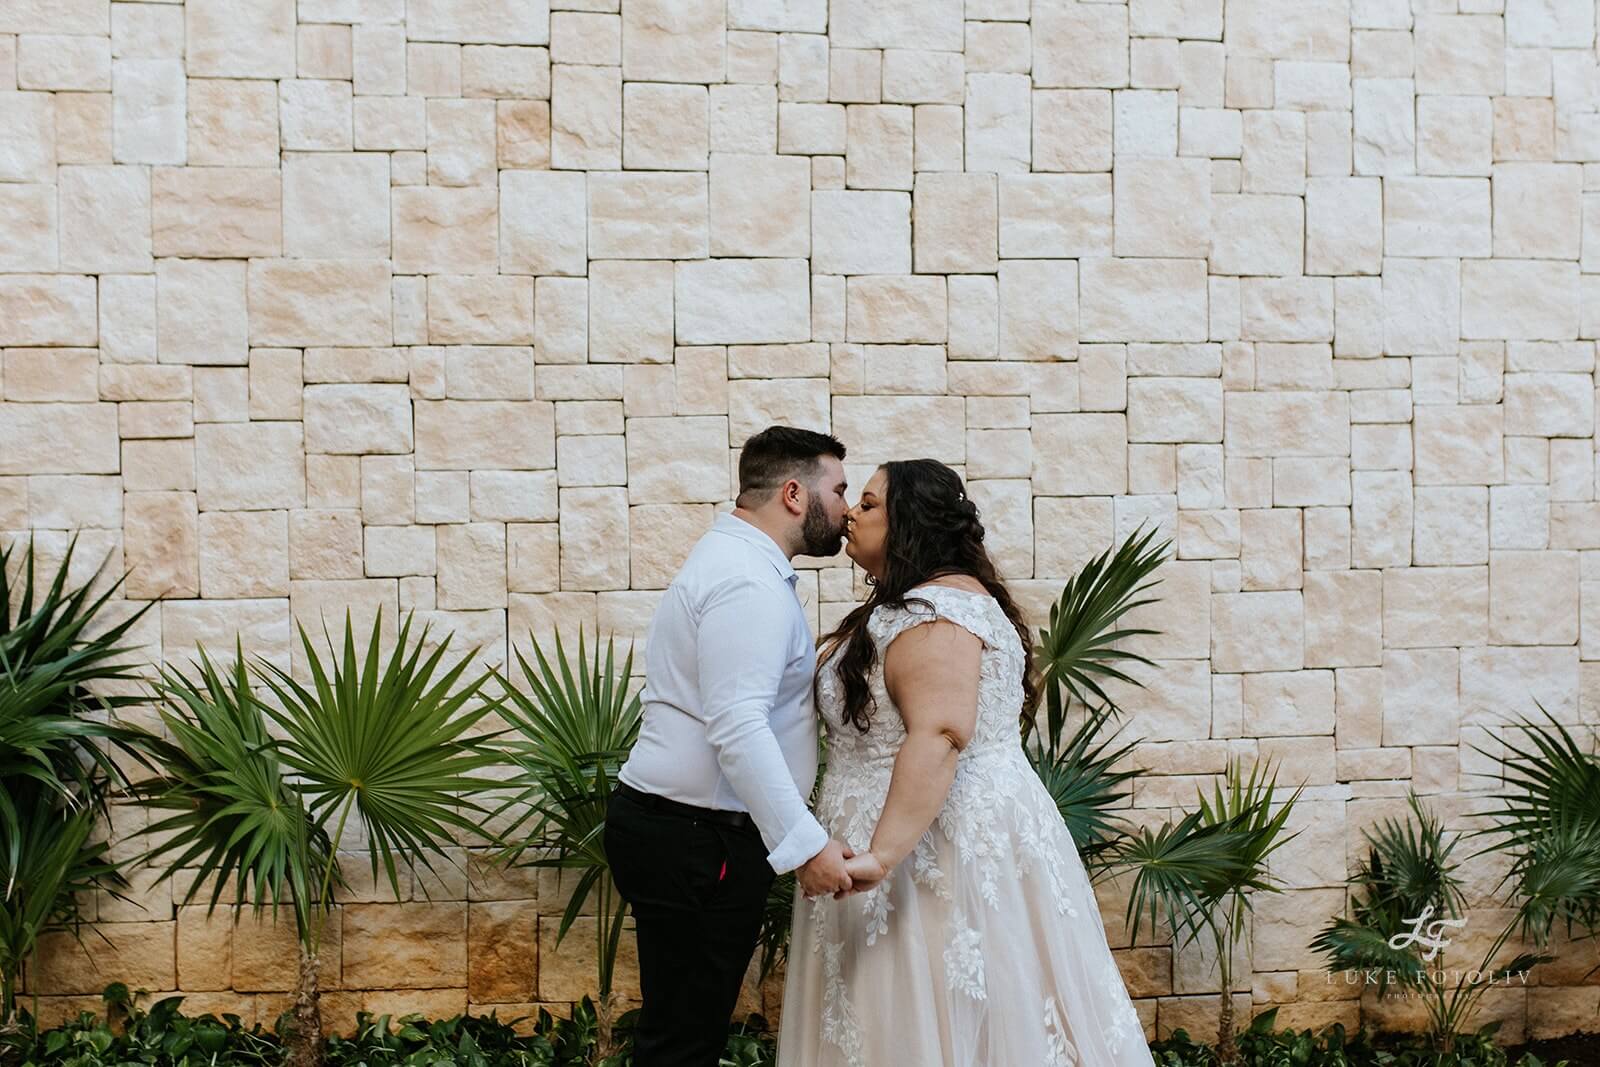 Happy couple kissing in front of a stone wall with tropical greenery.